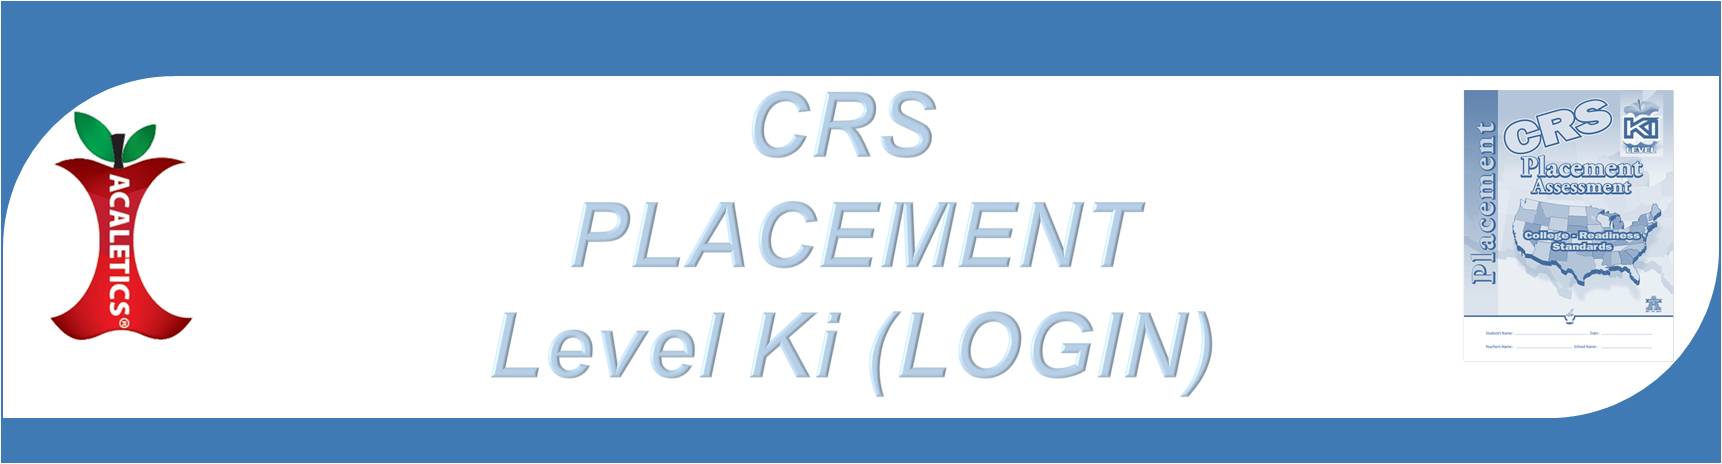 CRS Placement Login Heading